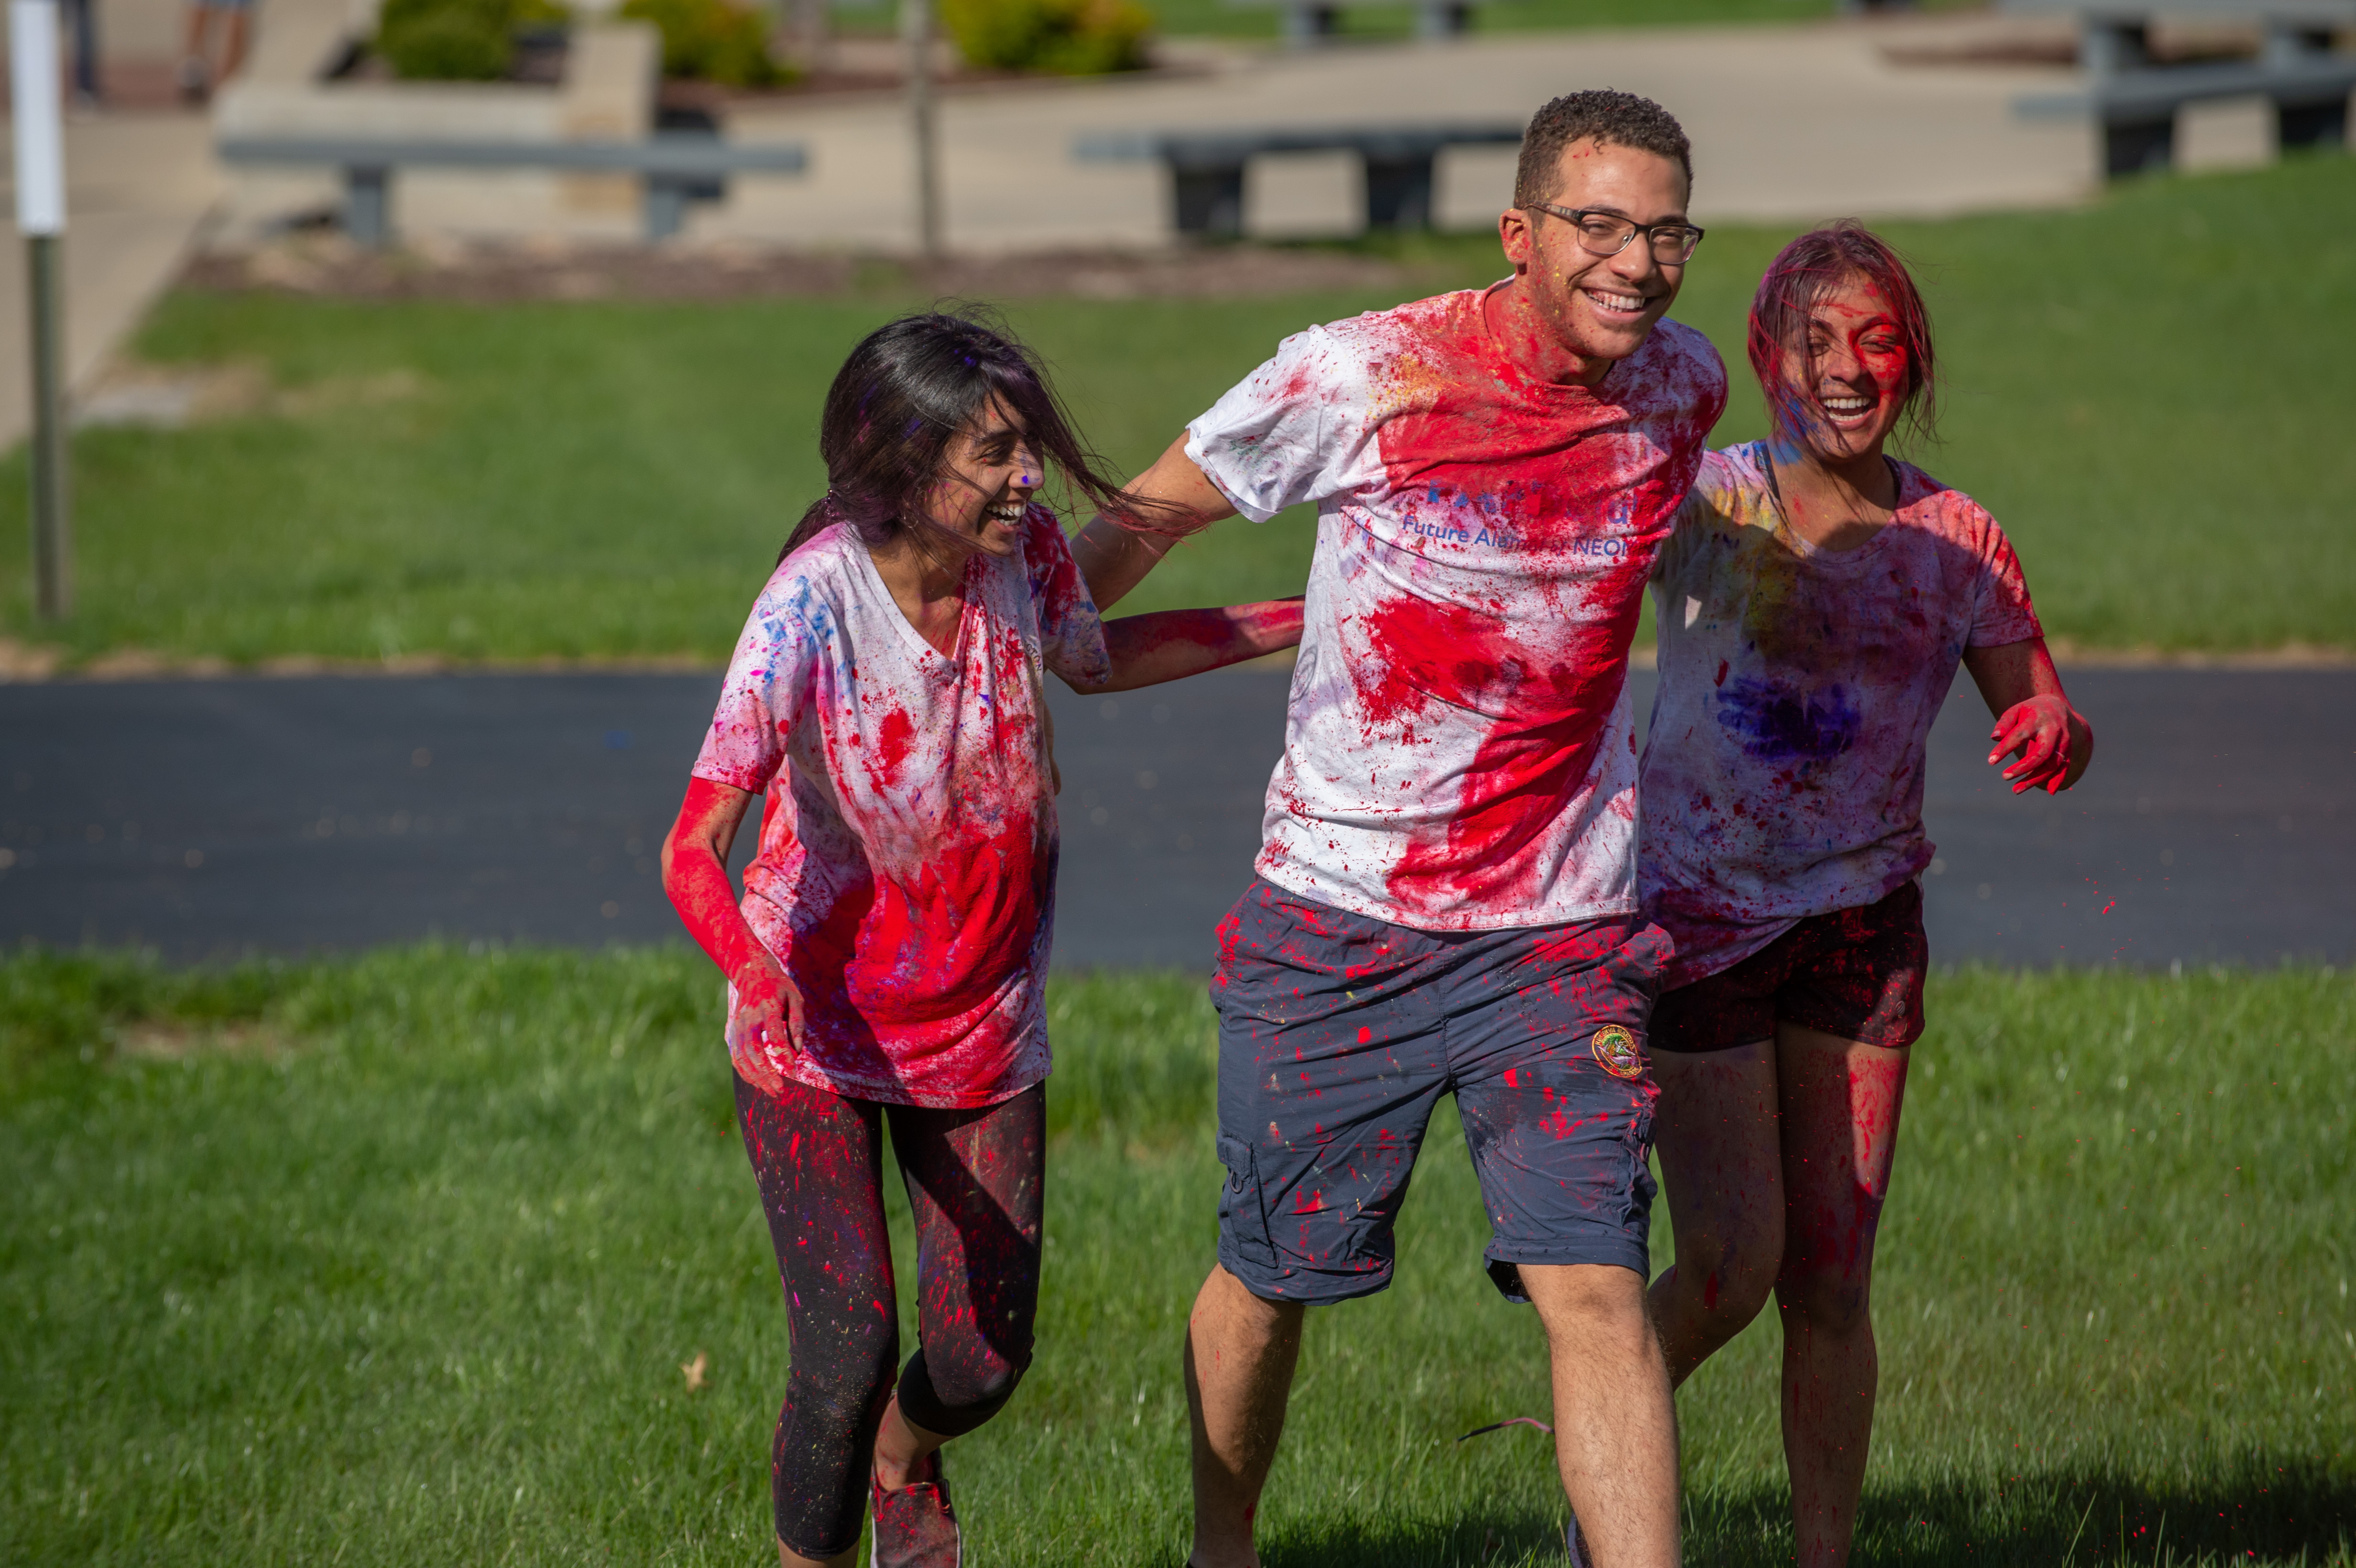 Students participating in Holi